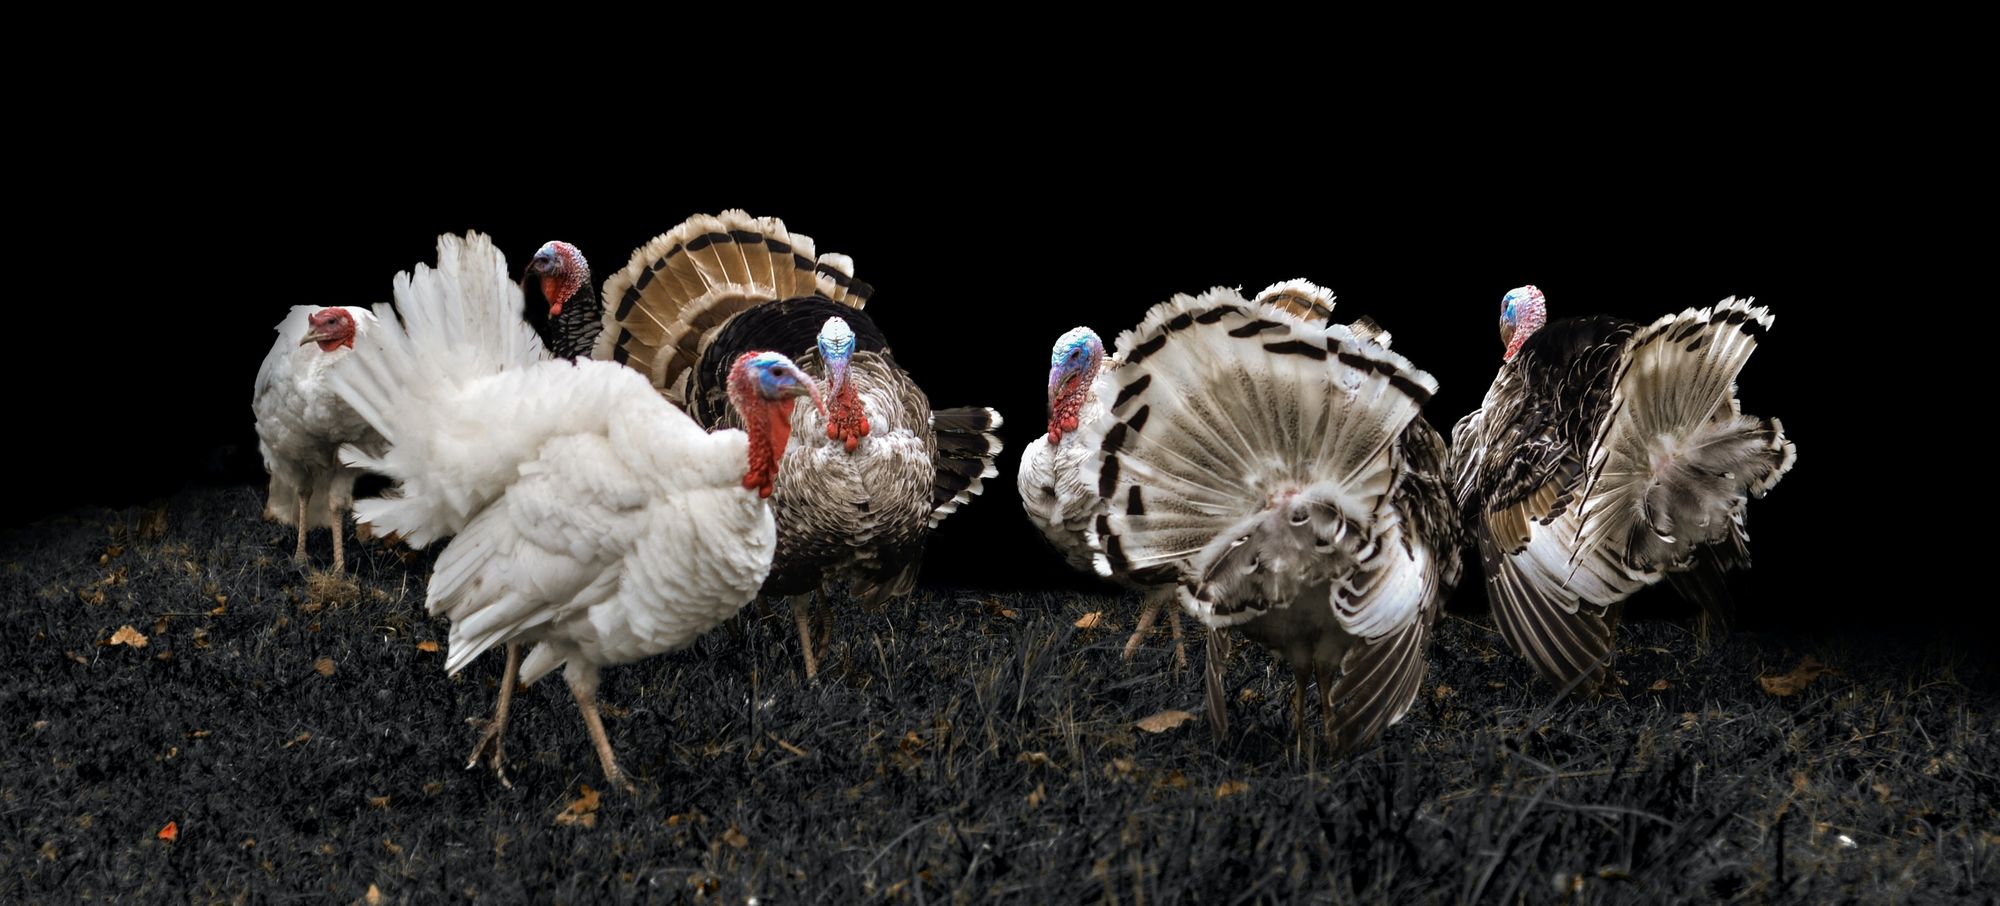 Texas Outlaw Writers Newsletter: It's Turkeys All the Way Down Edition